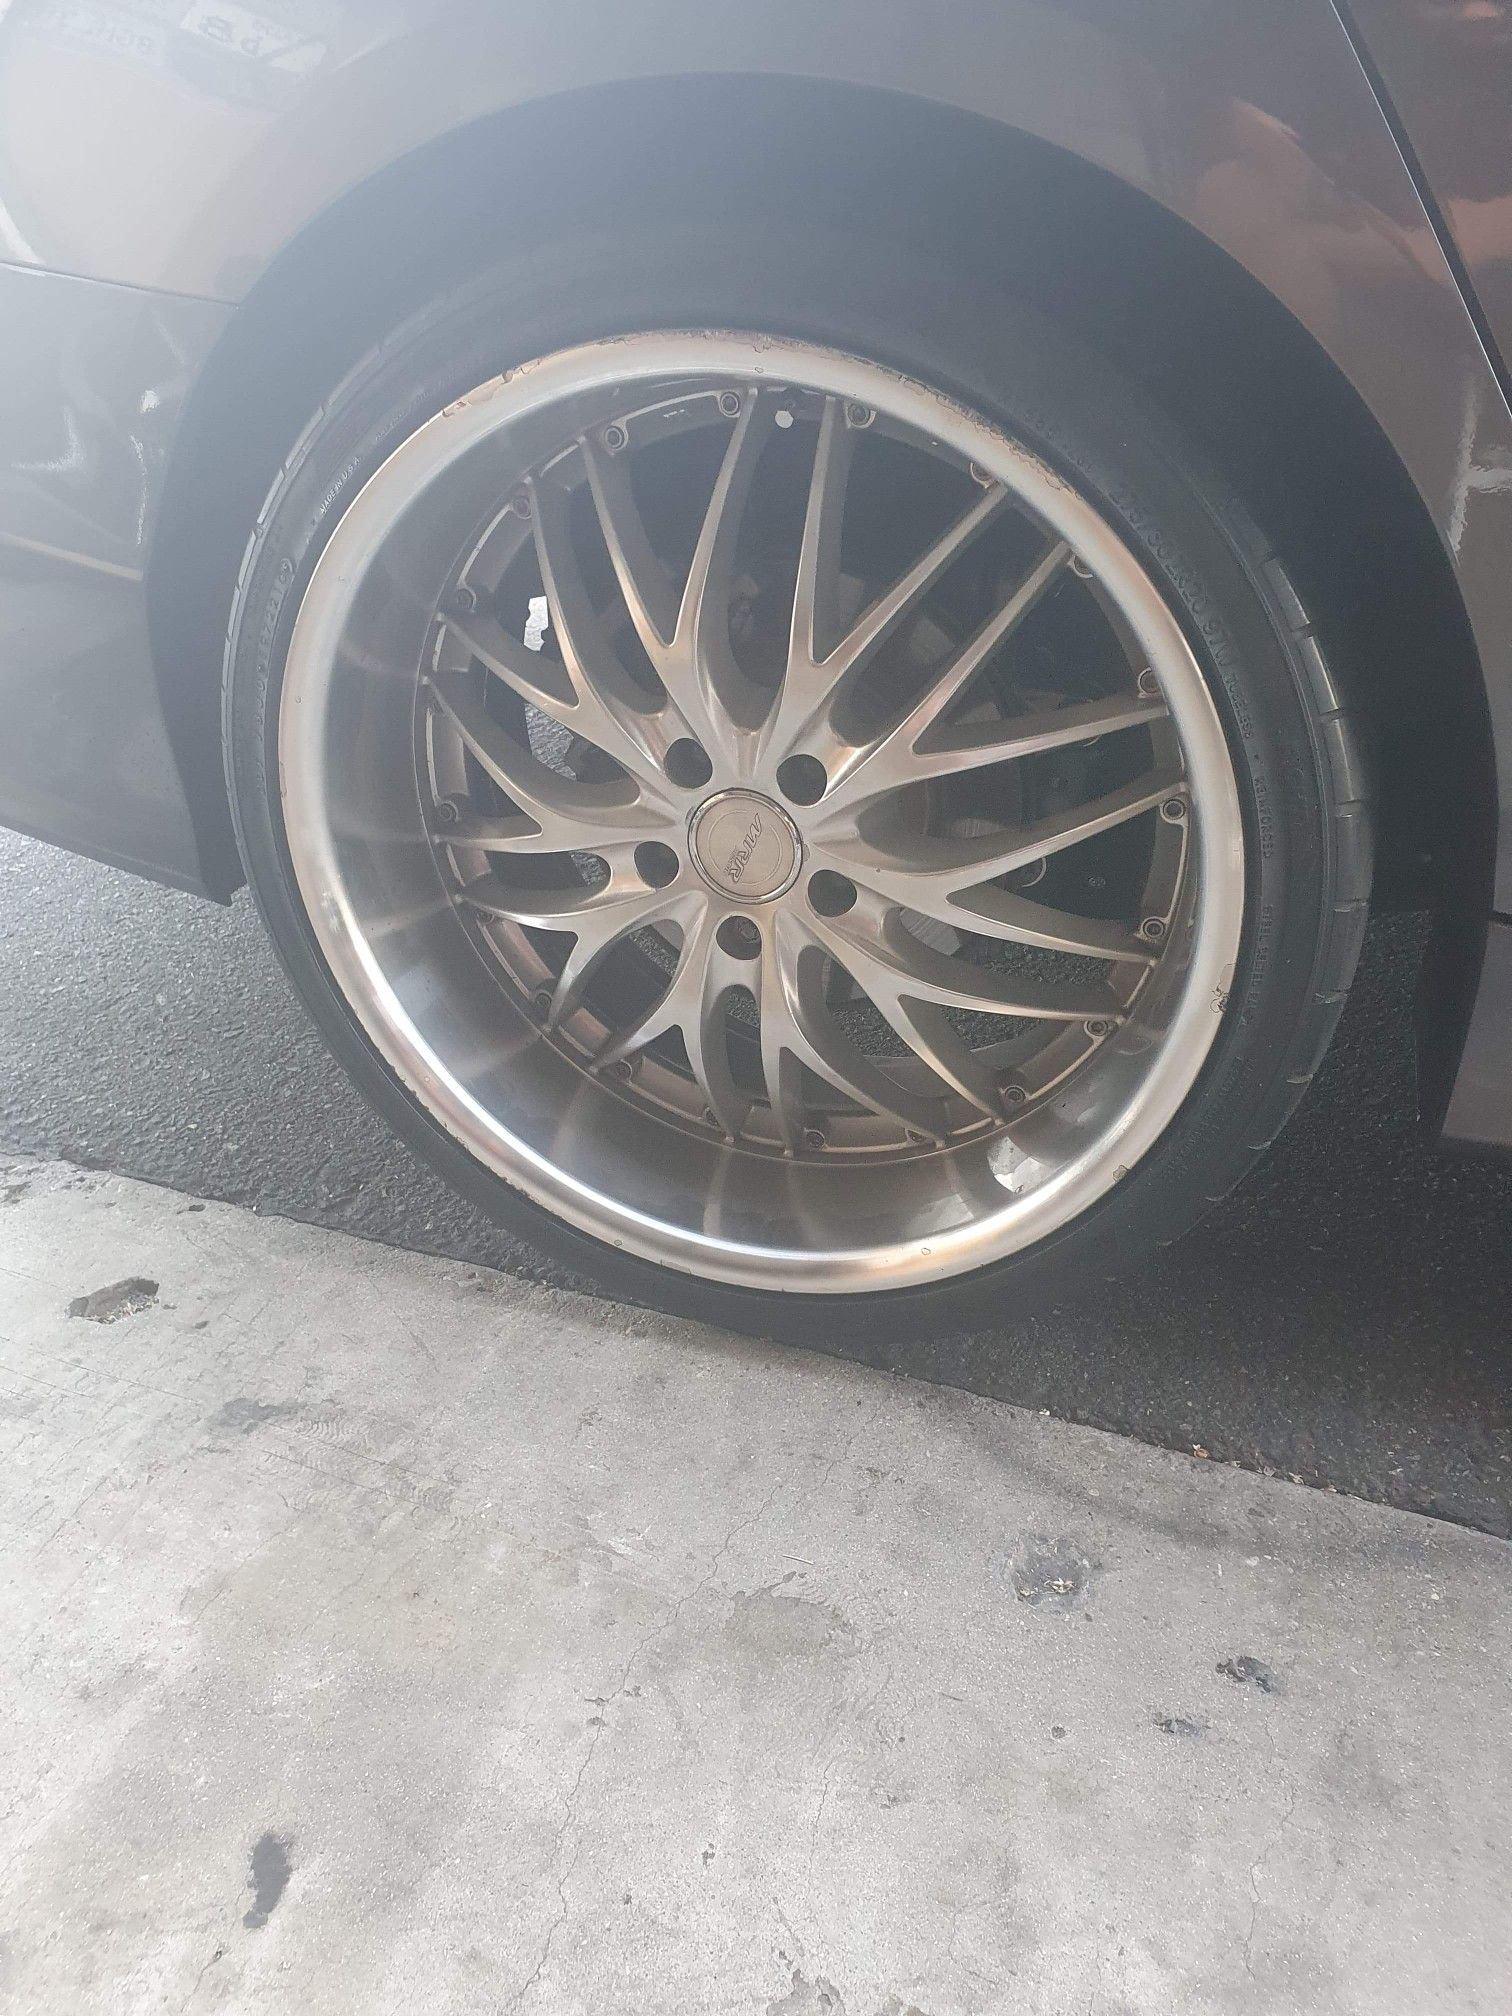 $700 obo 20x8.5 front 20x10.5 rear mrr gt1 staggered rims